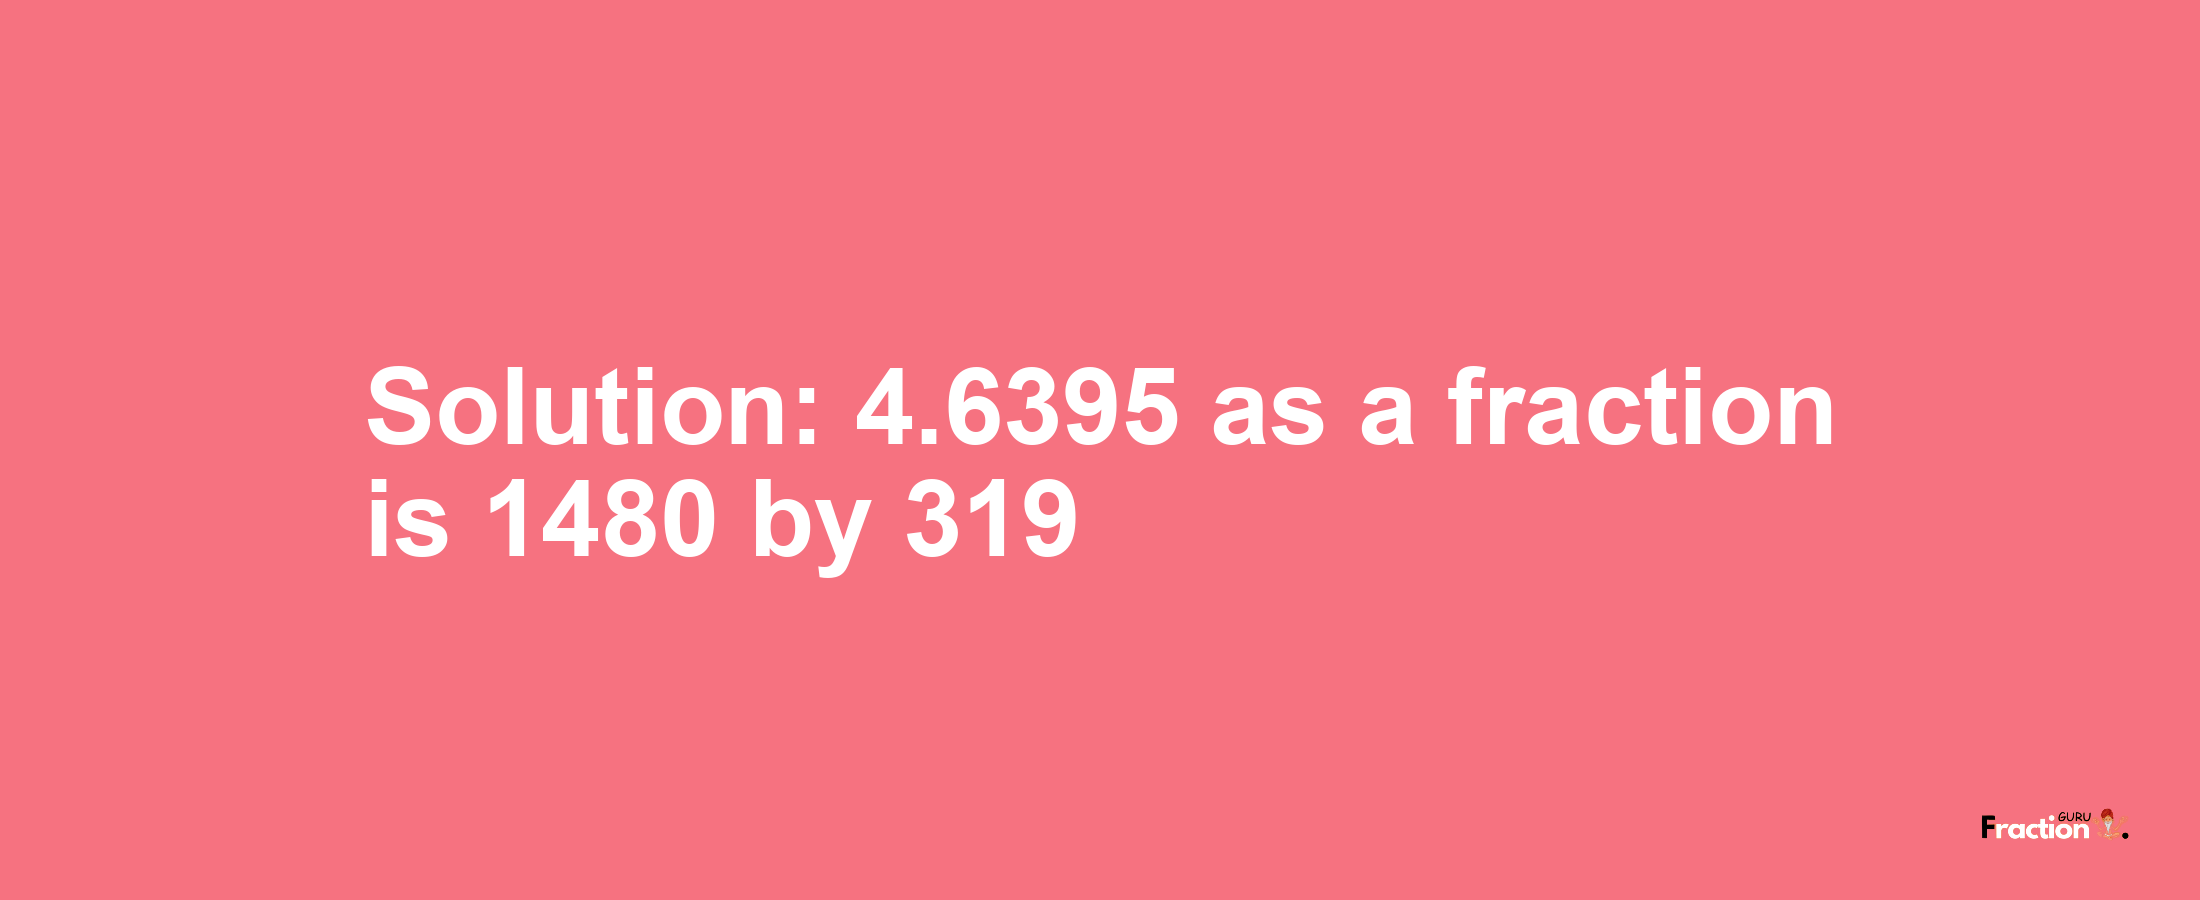 Solution:4.6395 as a fraction is 1480/319